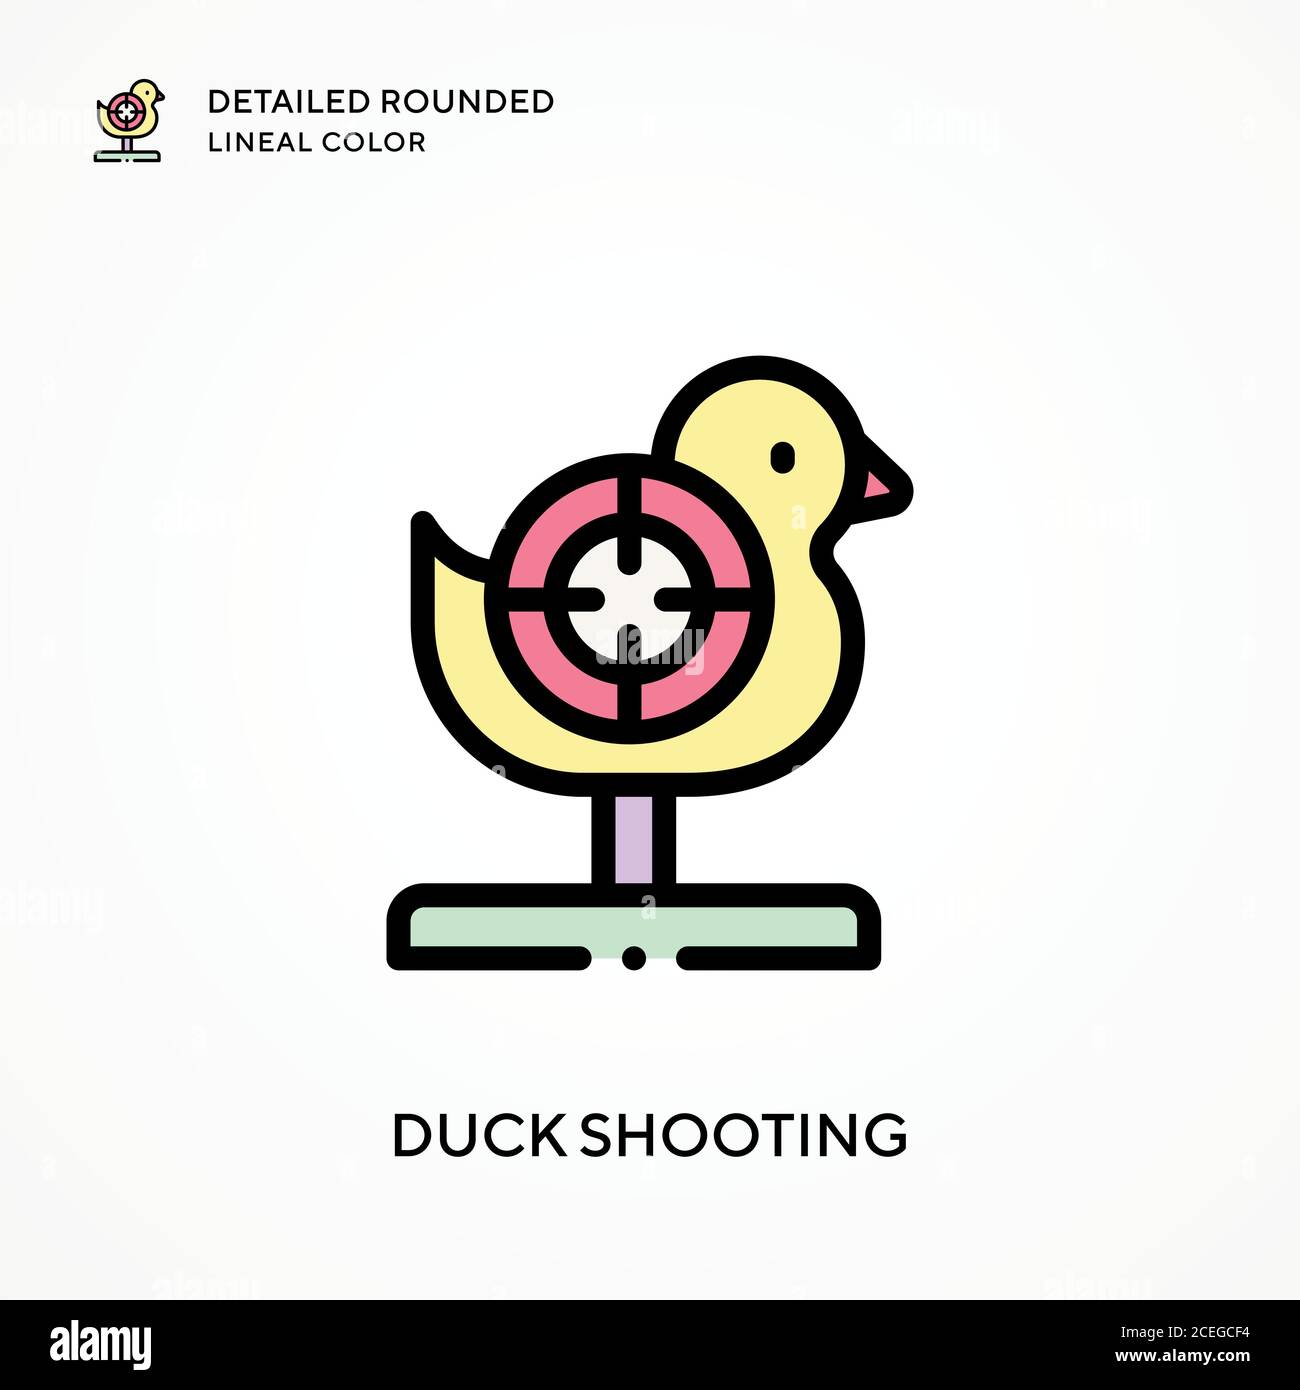 Duck shooting detailed rounded lineal color. Modern vector illustration concepts. Easy to edit and customize. Stock Vector